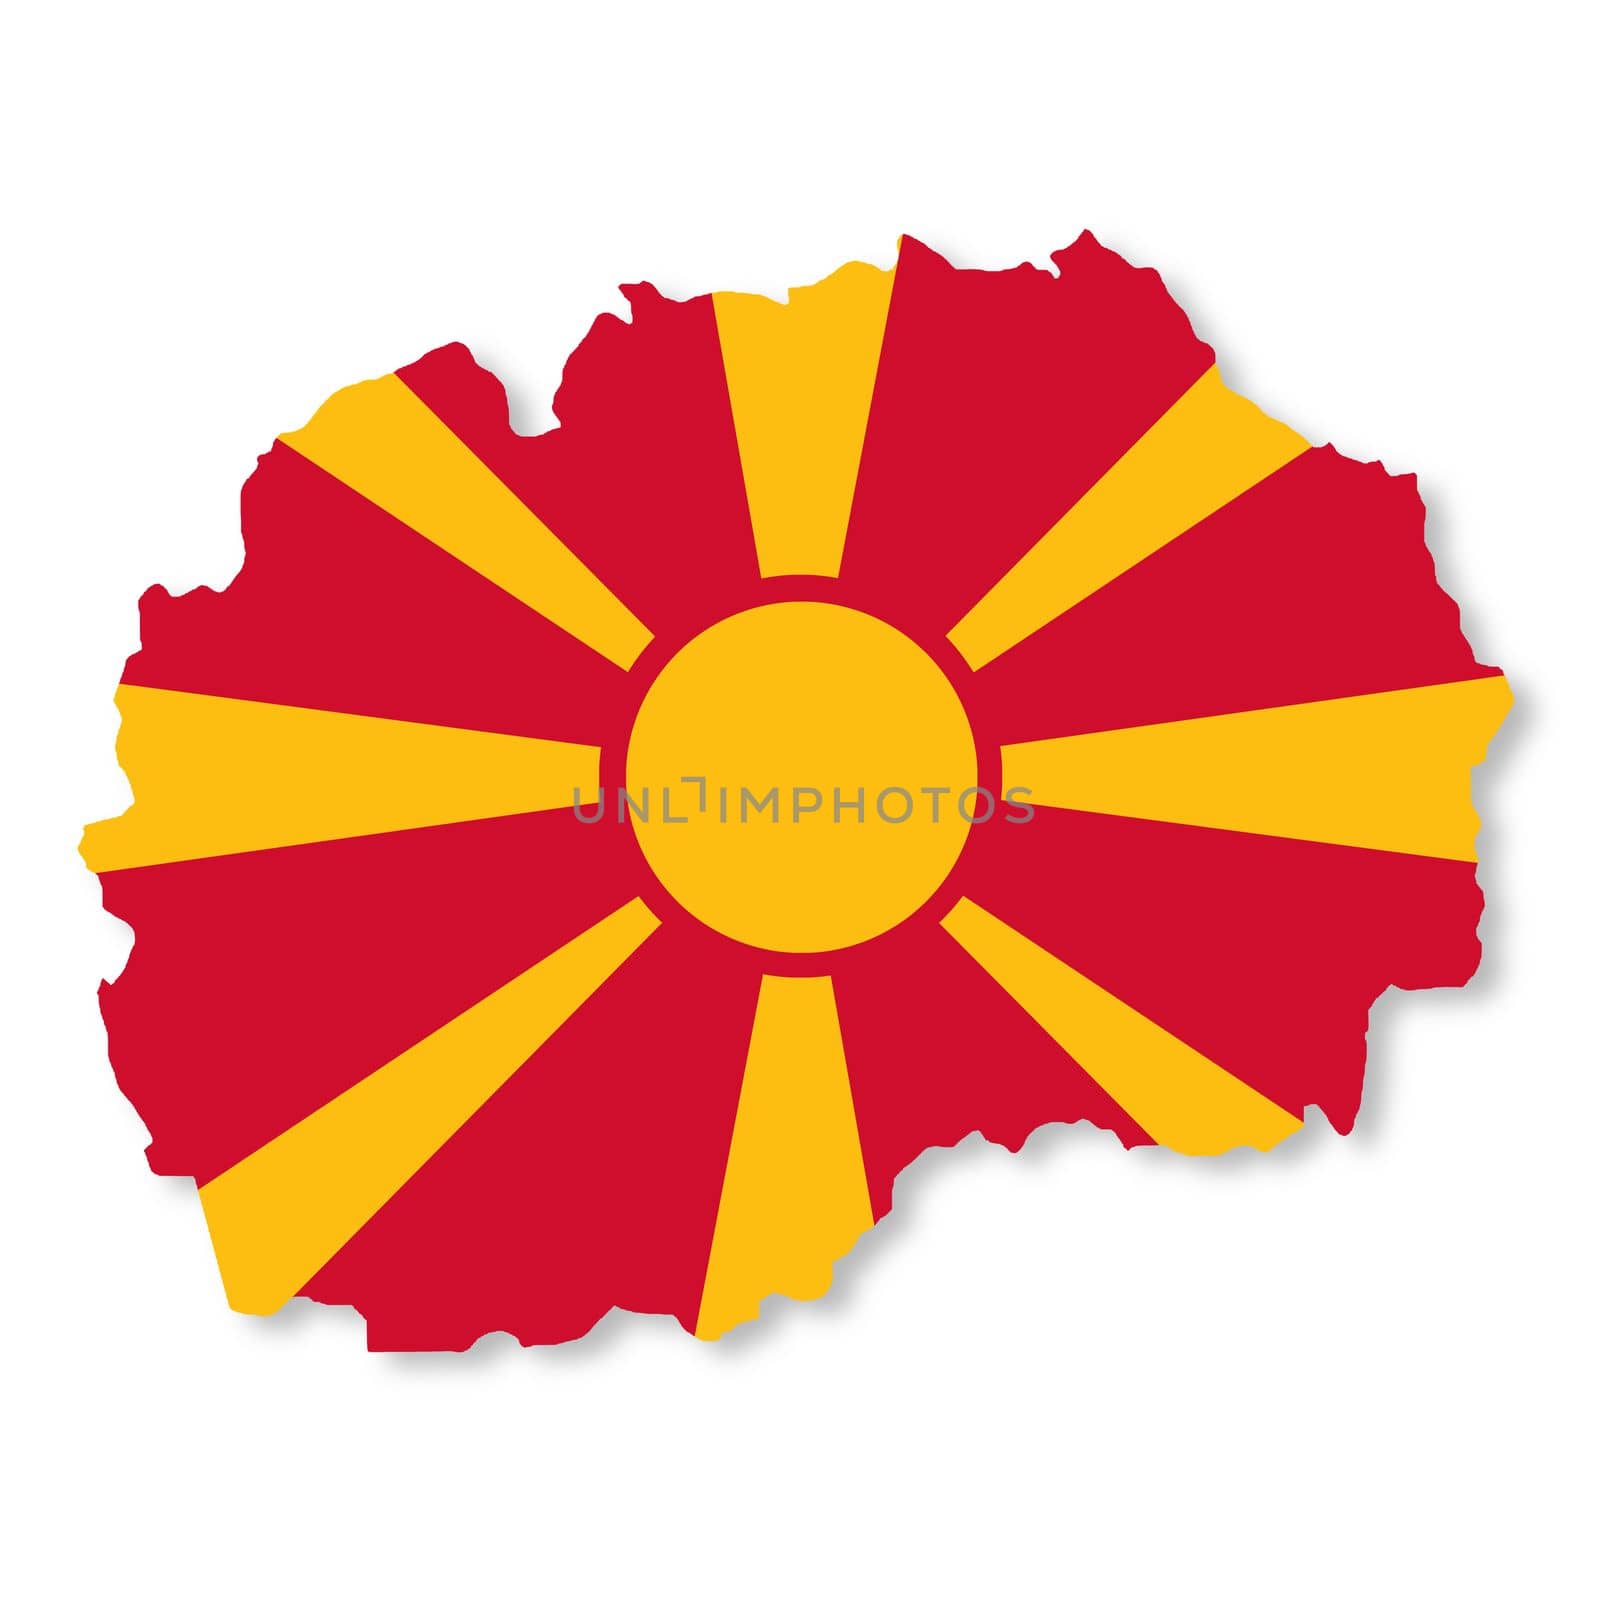 A North Macedonia flag map on white background with clipping path 3d illustration